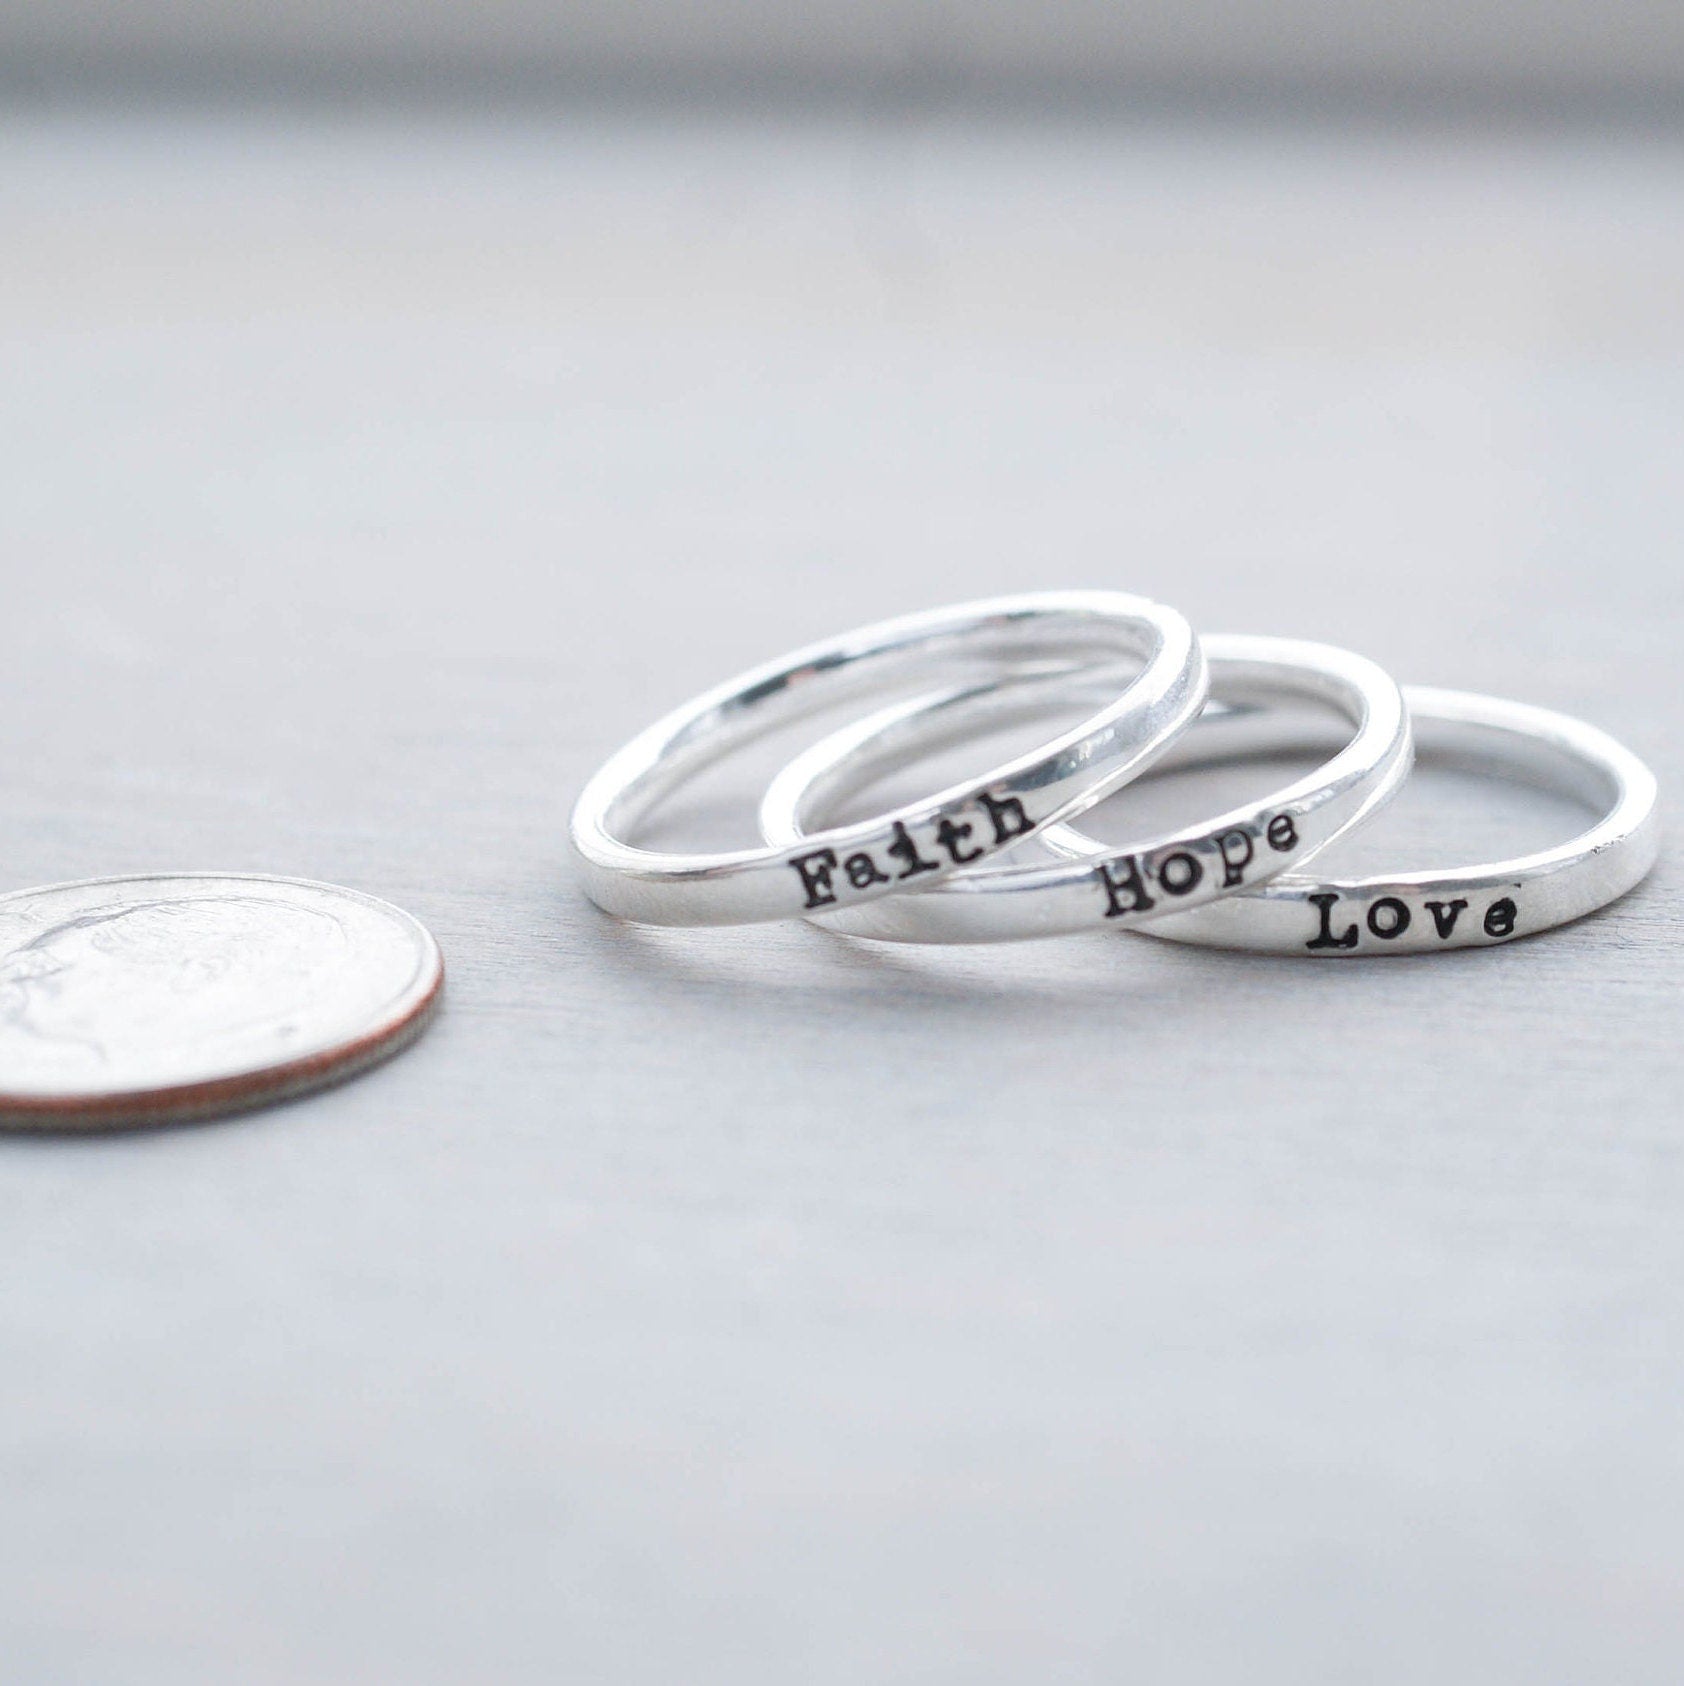 3 Sterling silver rings stamped with Faith, hope and love next to dime